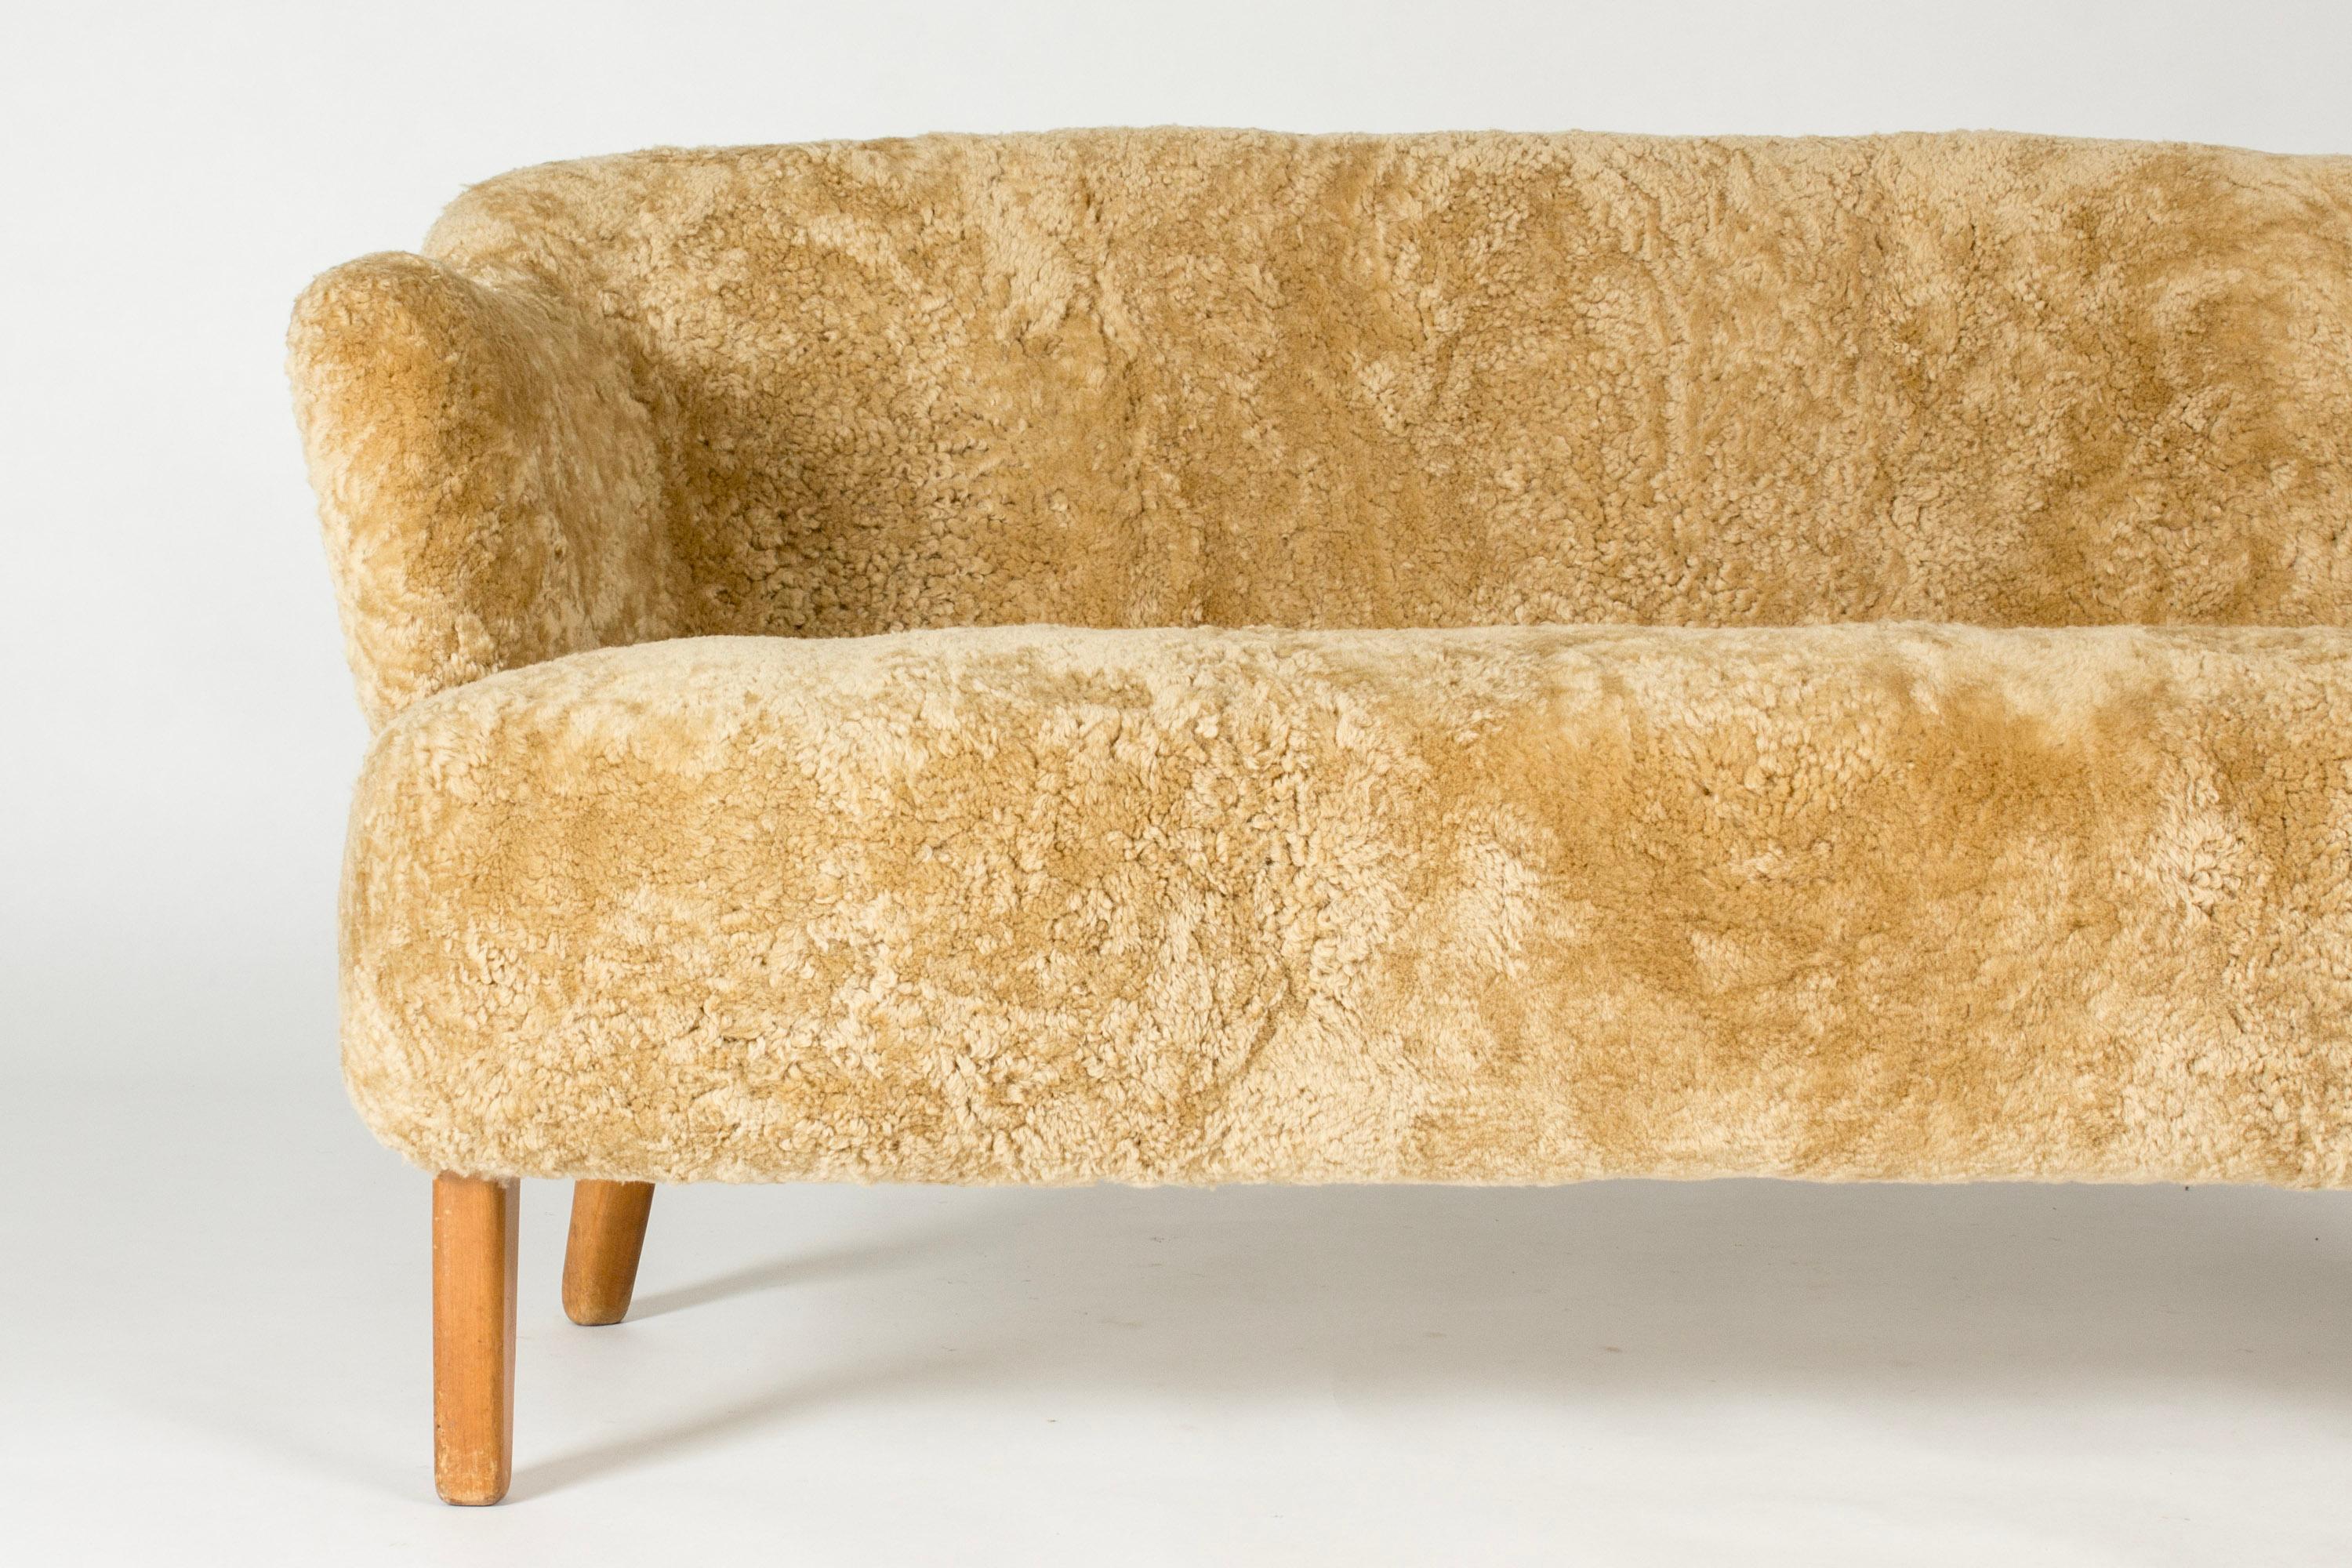 Beautiful “Ingeborg” sofa by Flemming Lassen, with curvesome forms. Designed in 1940 and named after his mother, the artist Ingeborg Winding. Upholstered with caramel colored sheepskin, birch legs.